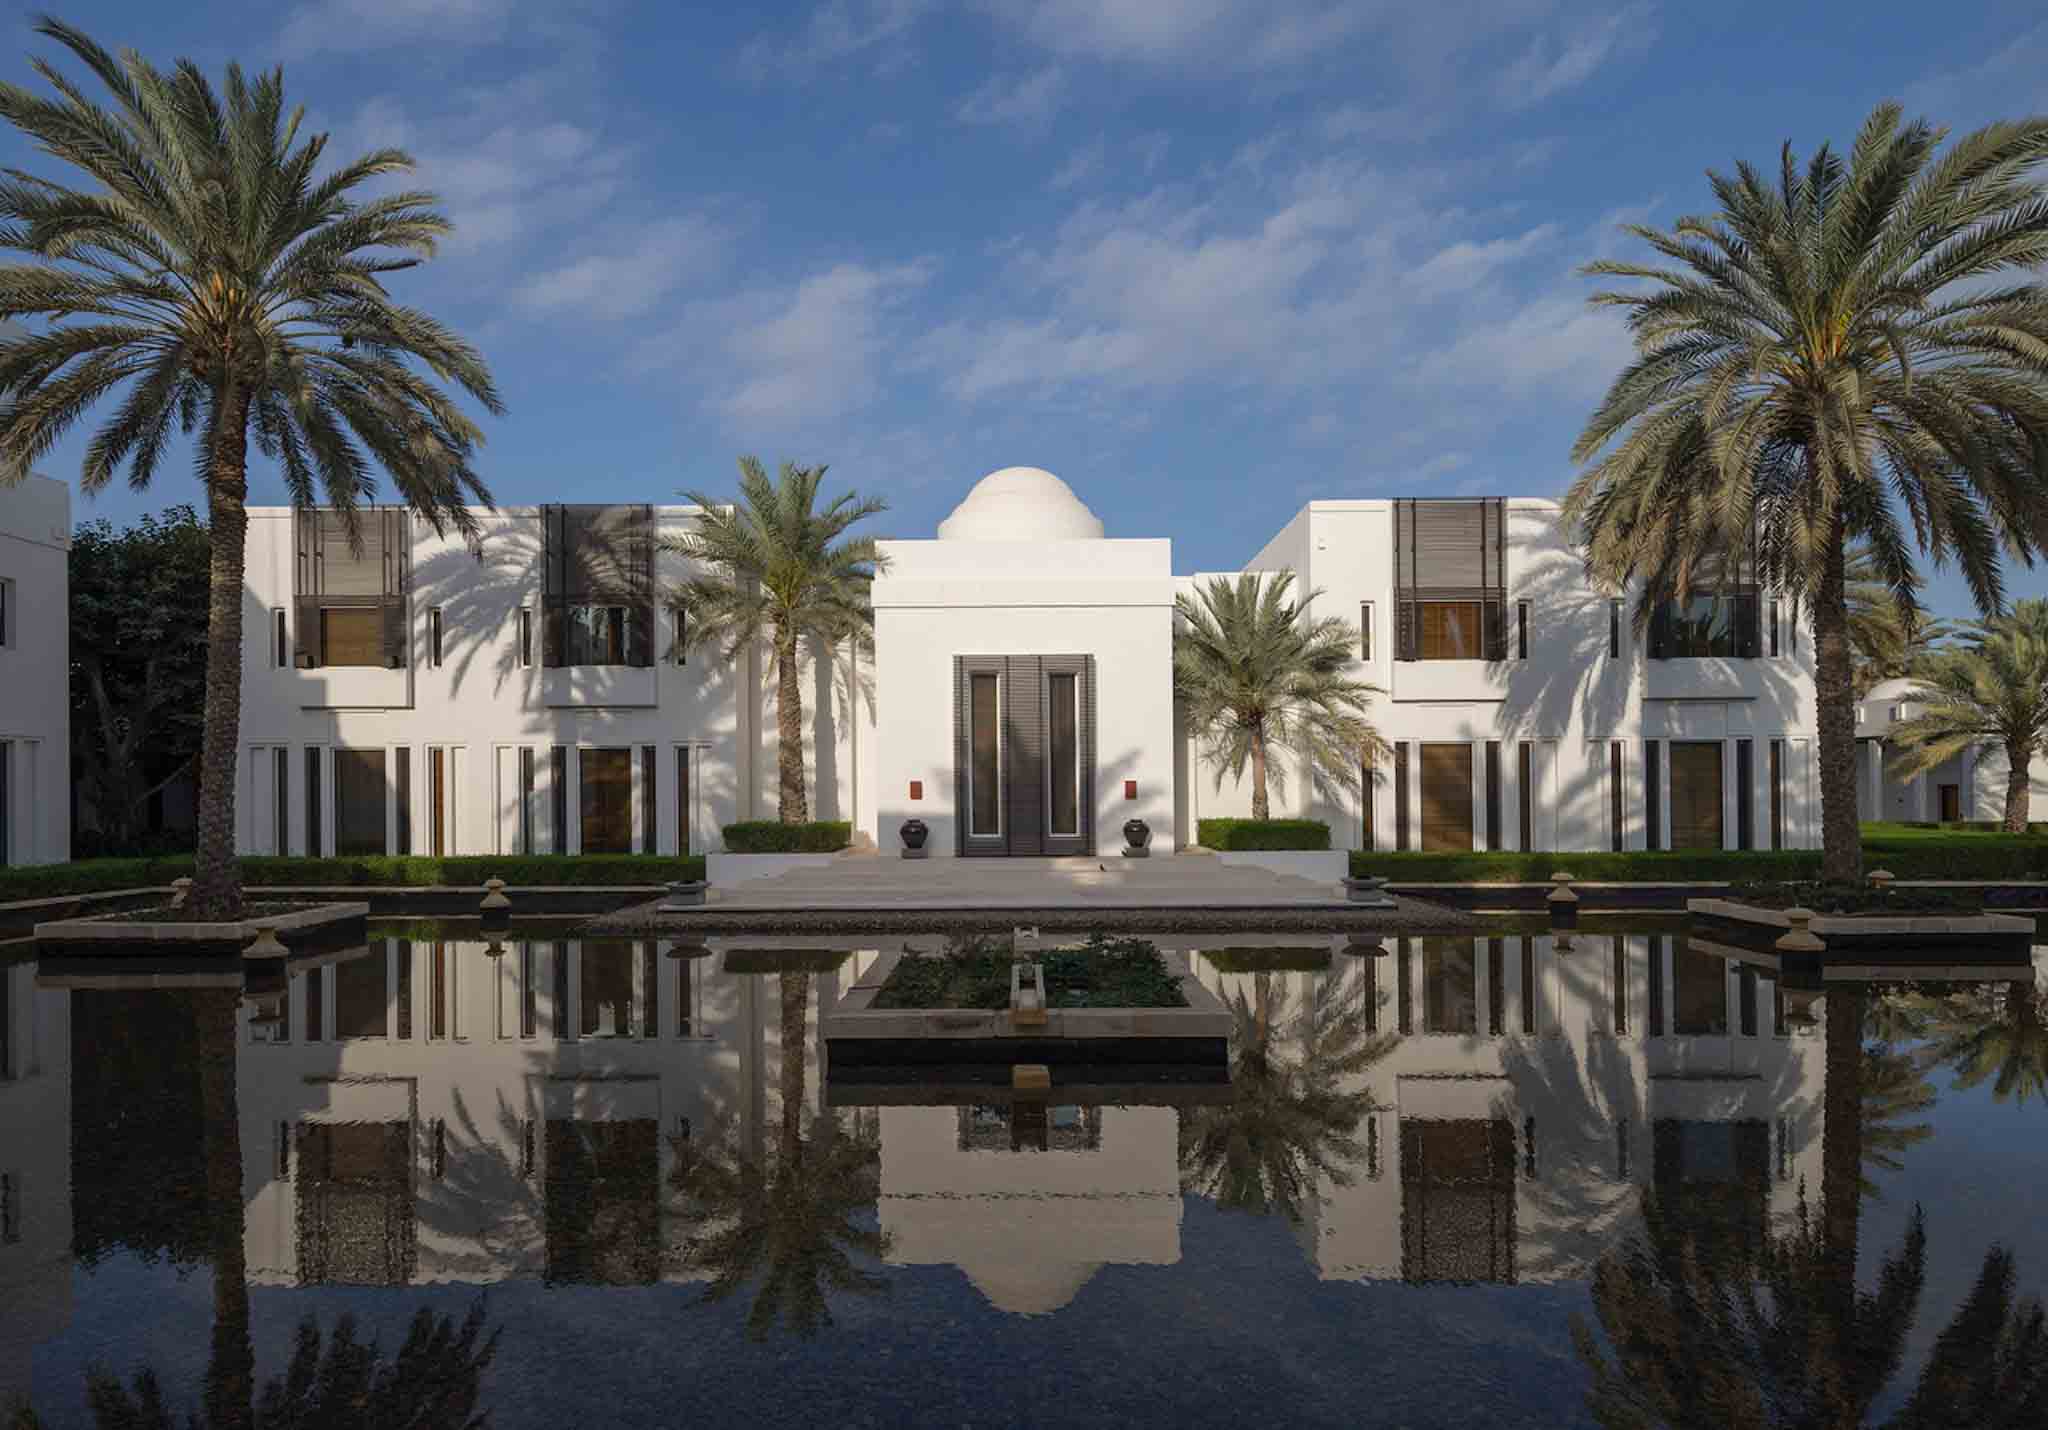 Robb Report recommends: The Chedi Muscat